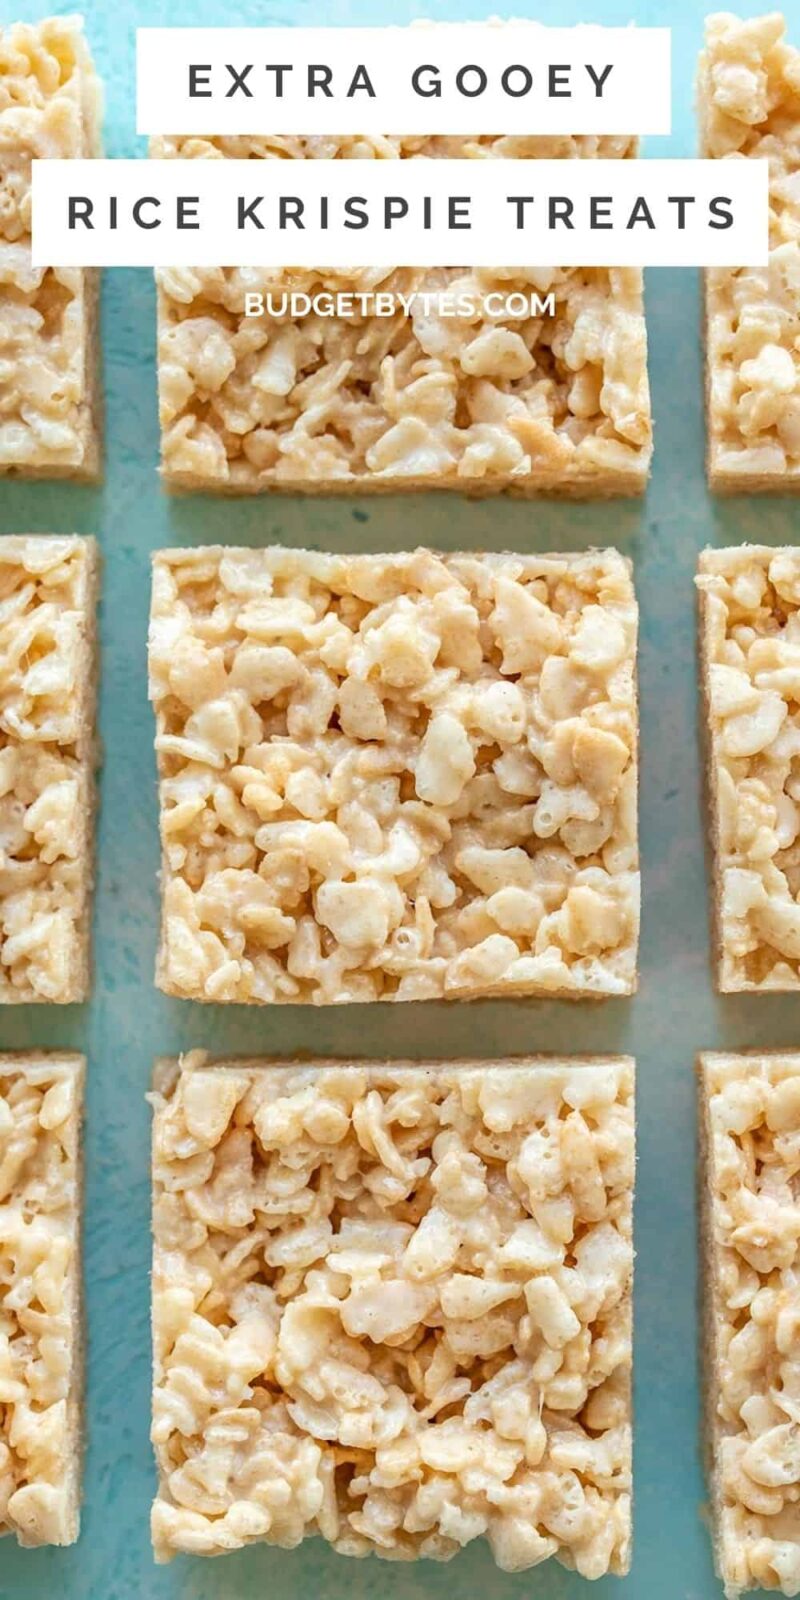 Rice krispie treats from above in a grid, title text at the top